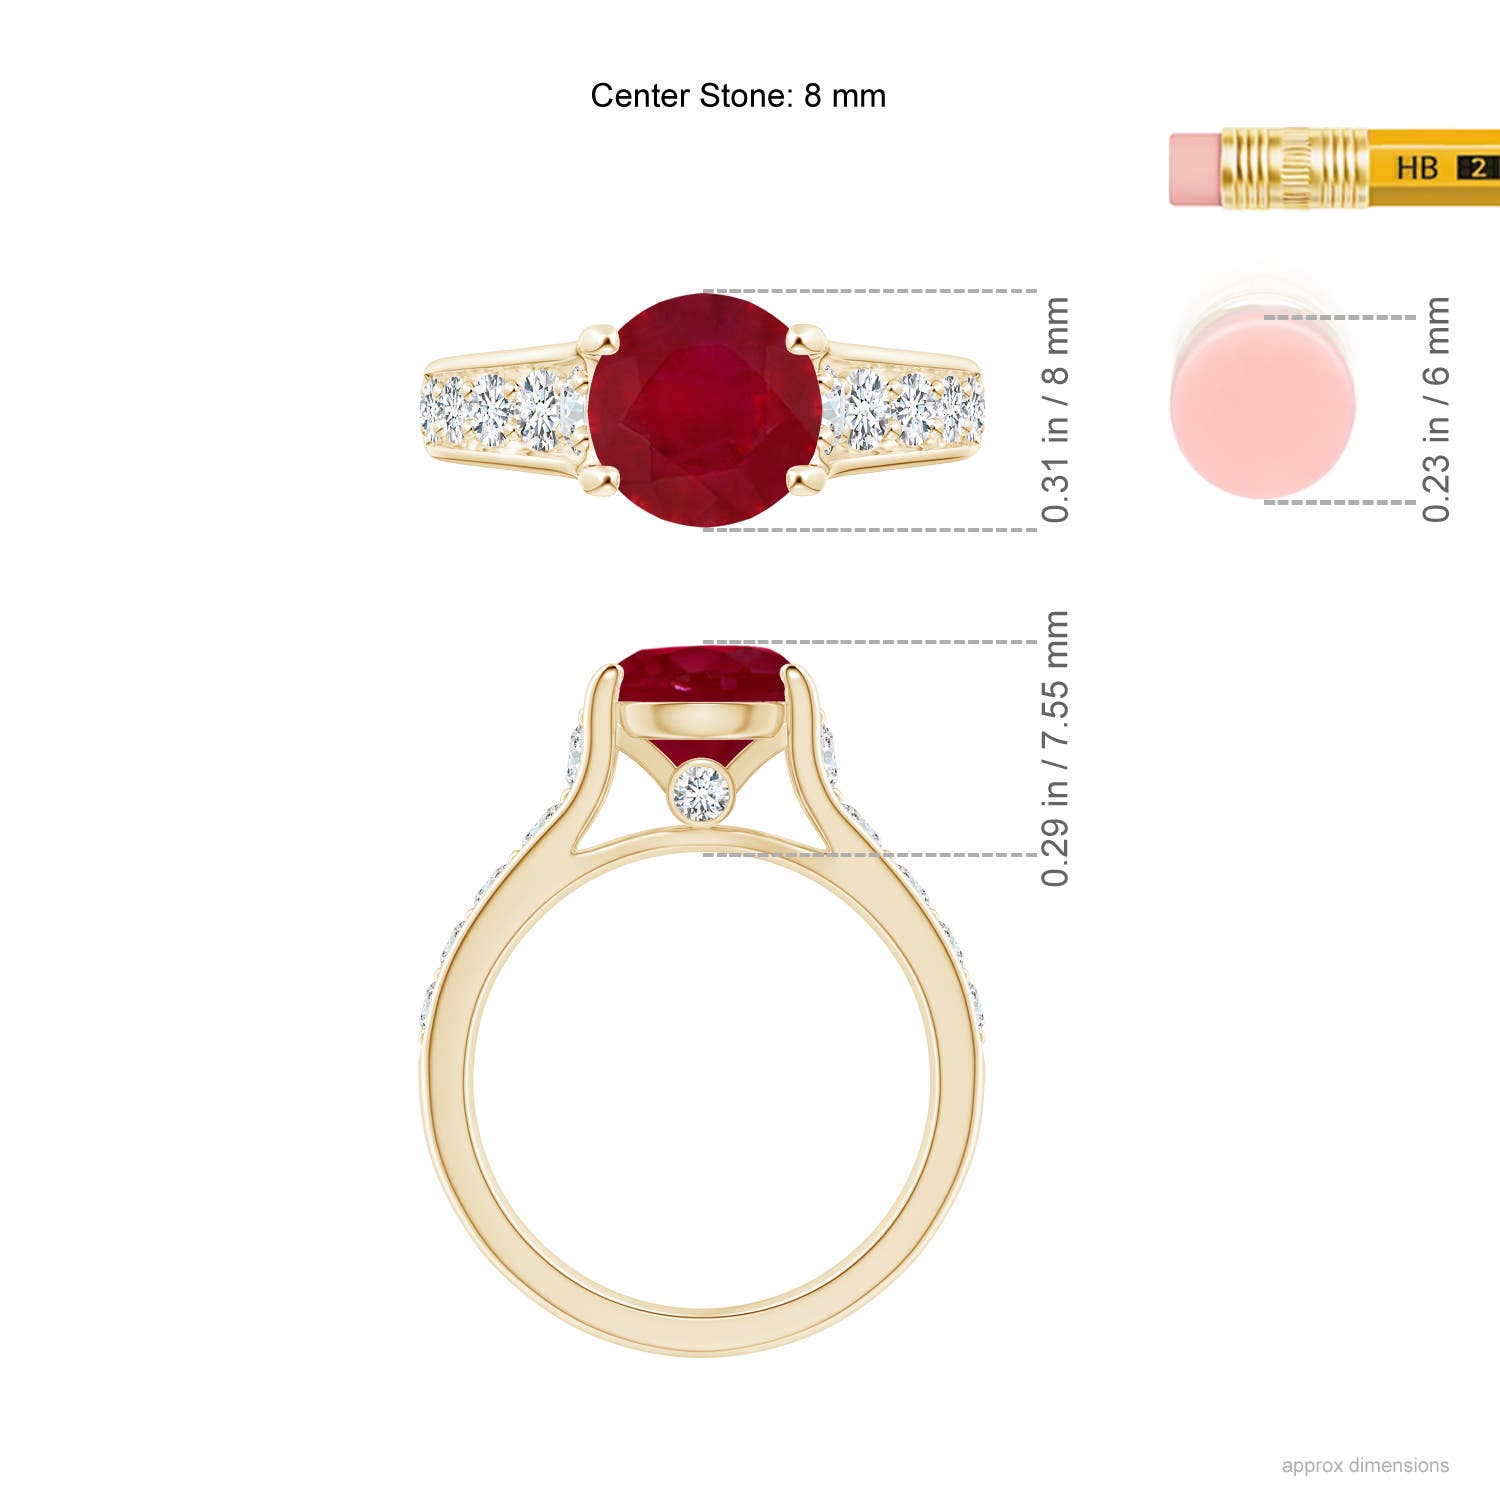 AA - Ruby / 2.8 CT / 14 KT Yellow Gold